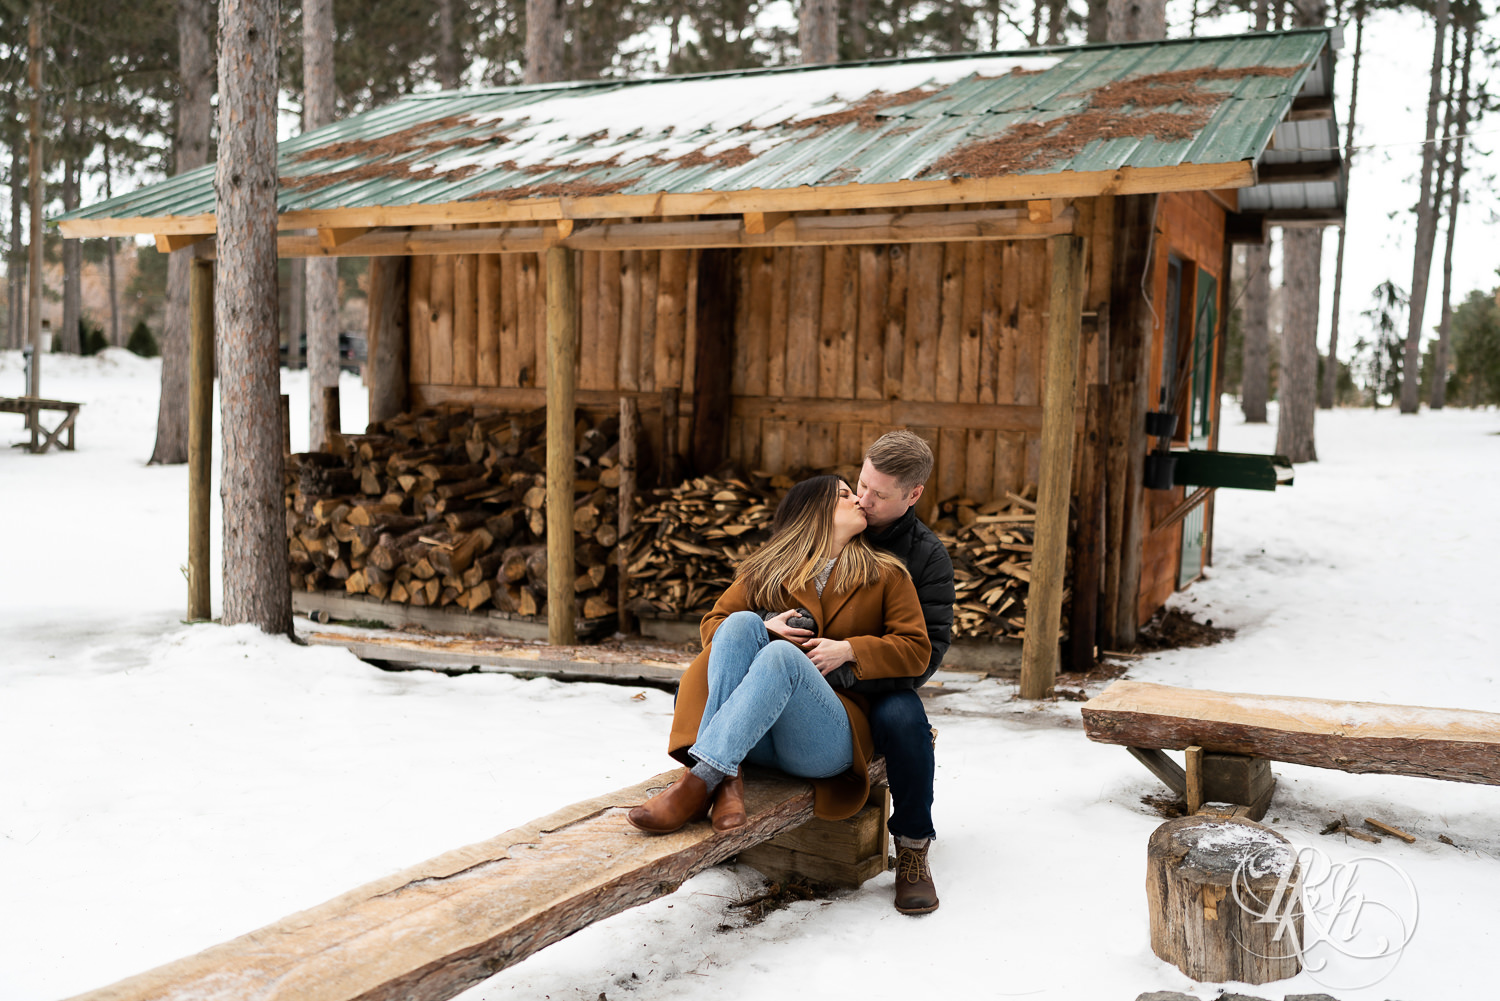 Man and woman sitting in front of woodpile in the snow at Hansen Tree Farm in Anoka, Minnesota.